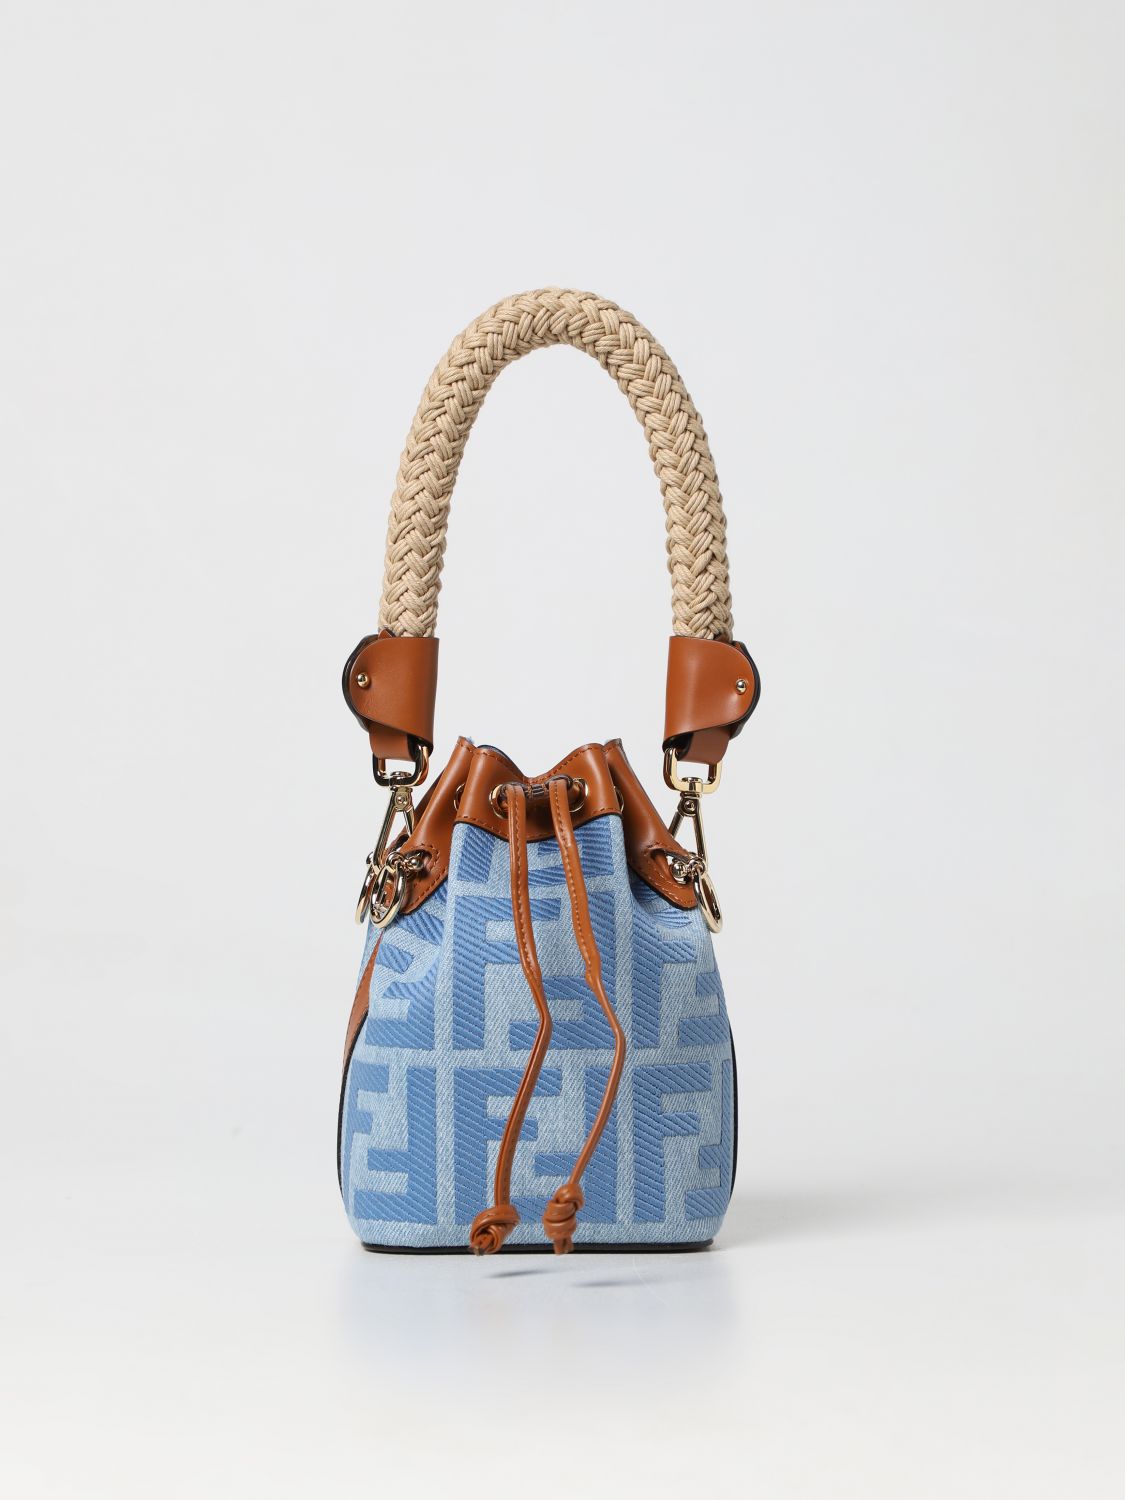 The Fendi Bucket Bag Is Your New BFF If You're a Millenial Or Gen-Z! Find  Out Why?